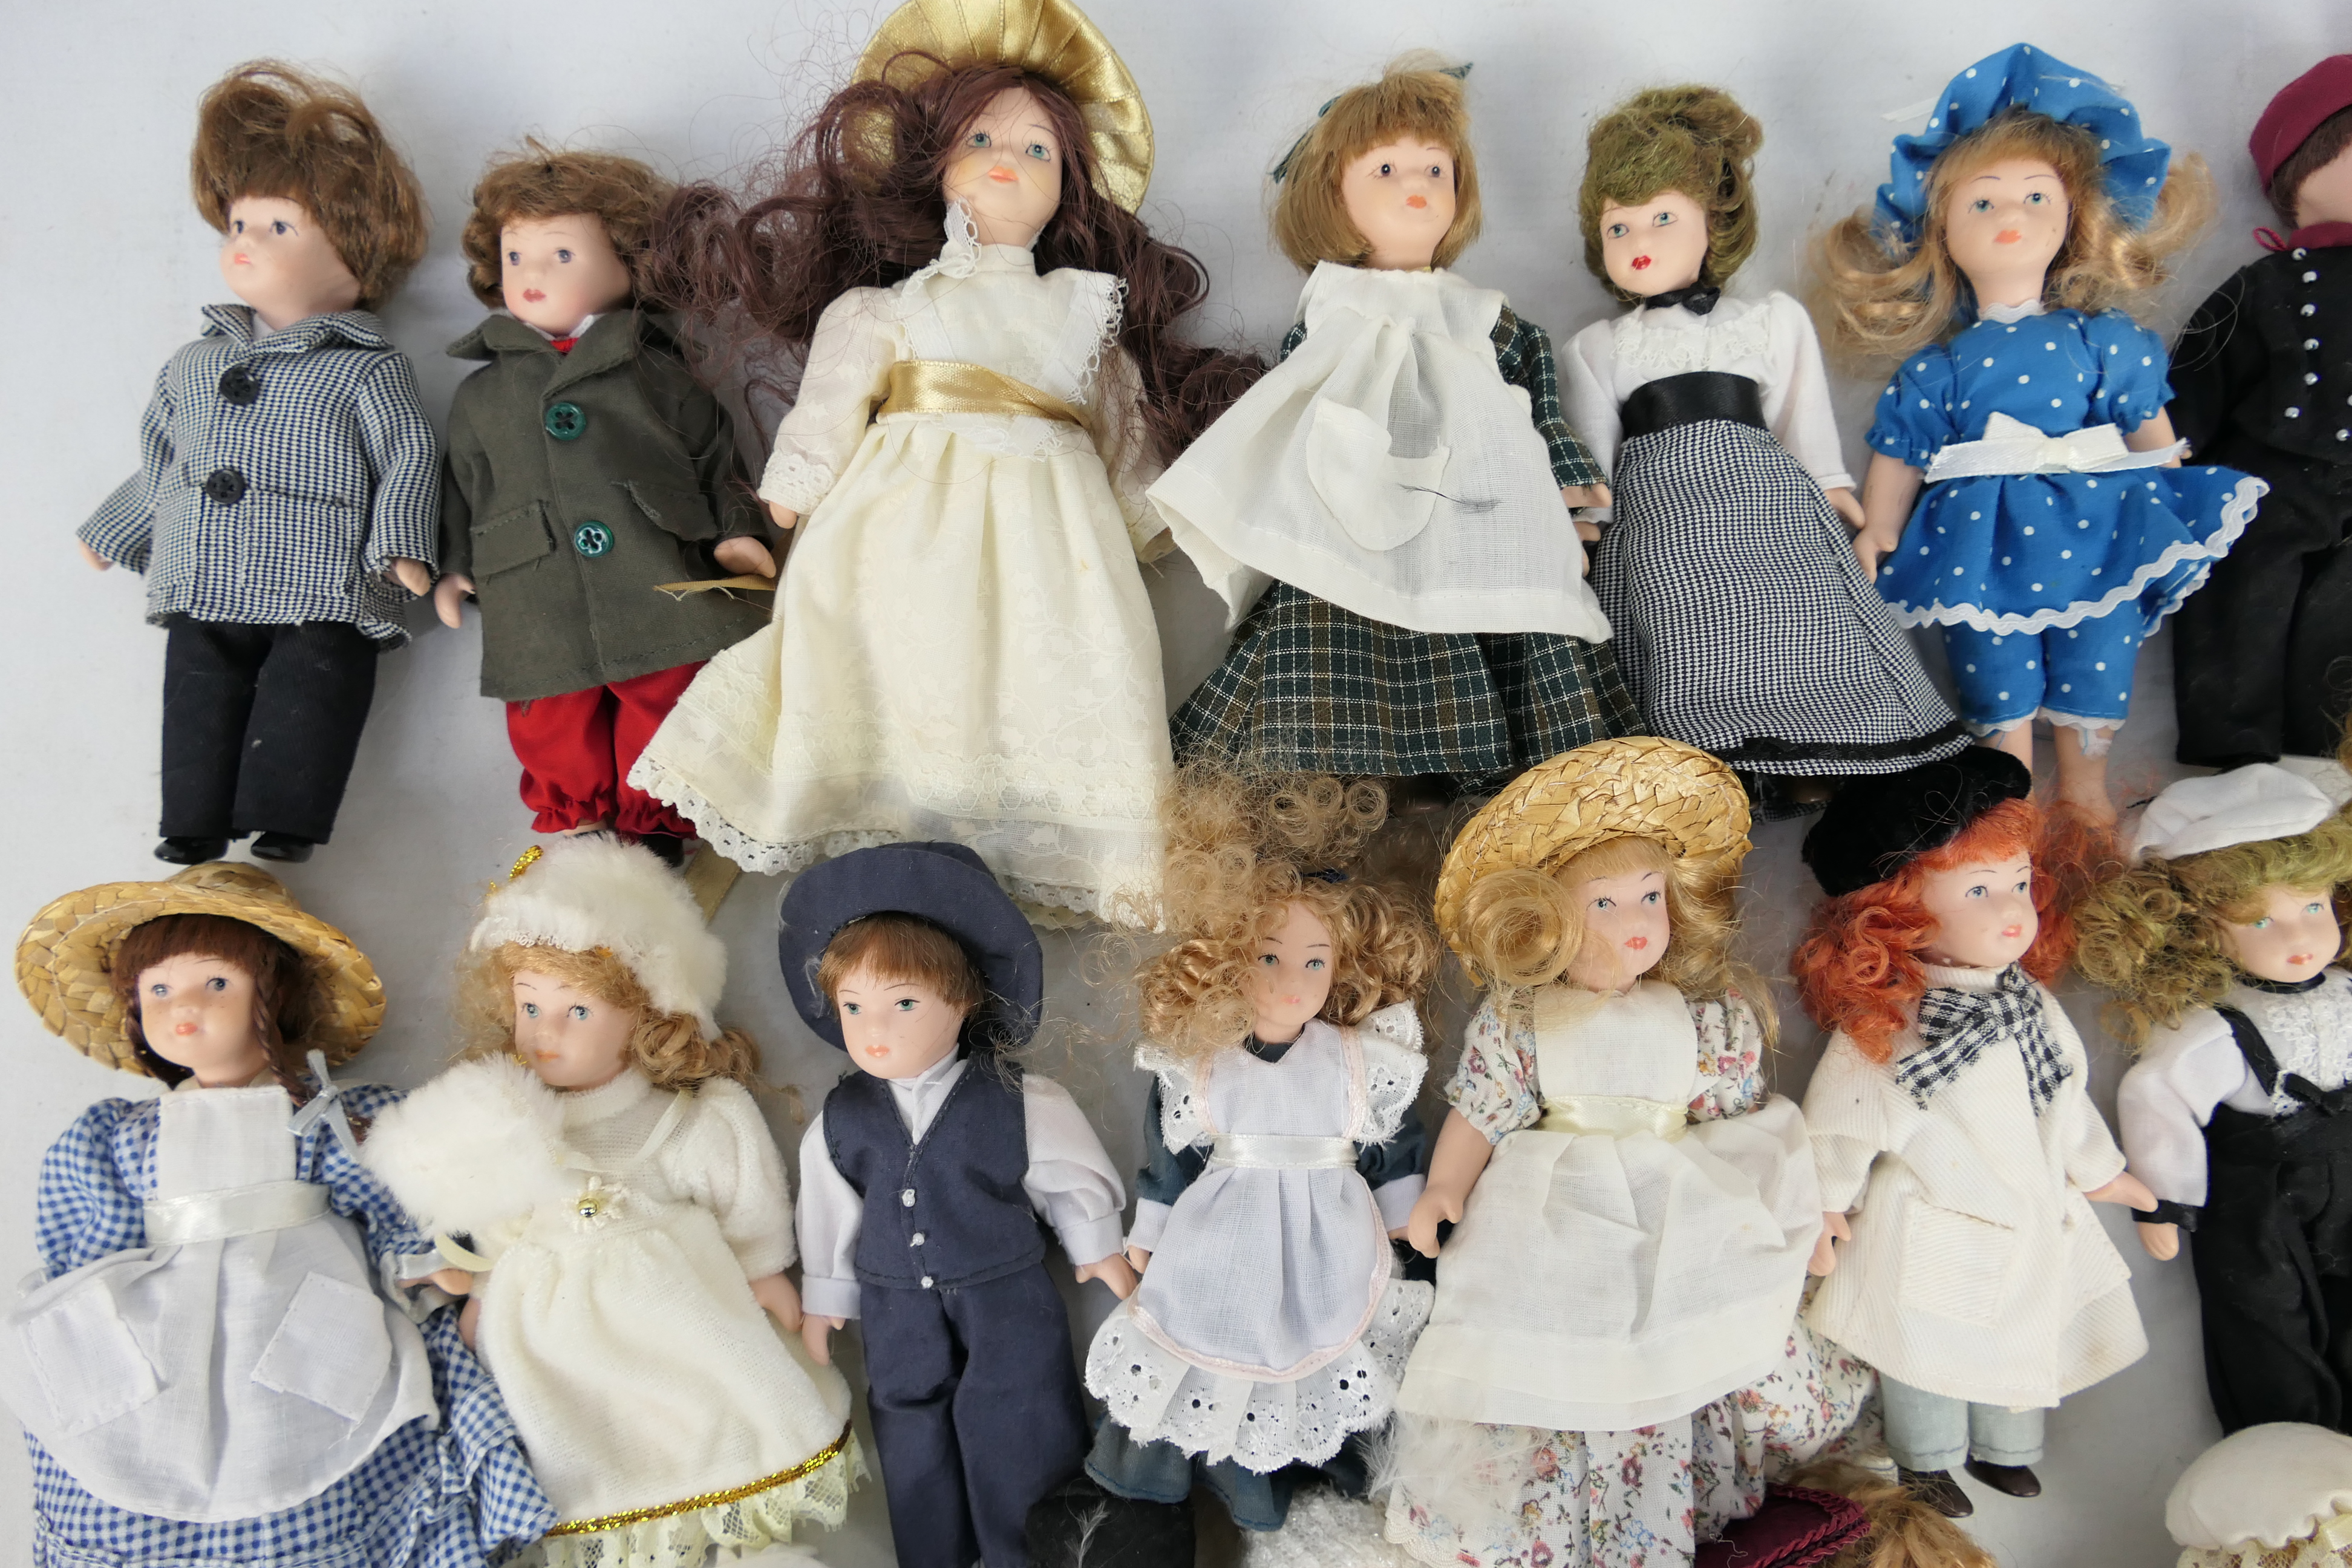 Deagostini - A collection of 25 miniature porcelain dolls attributed to Deagostini. - Image 4 of 5